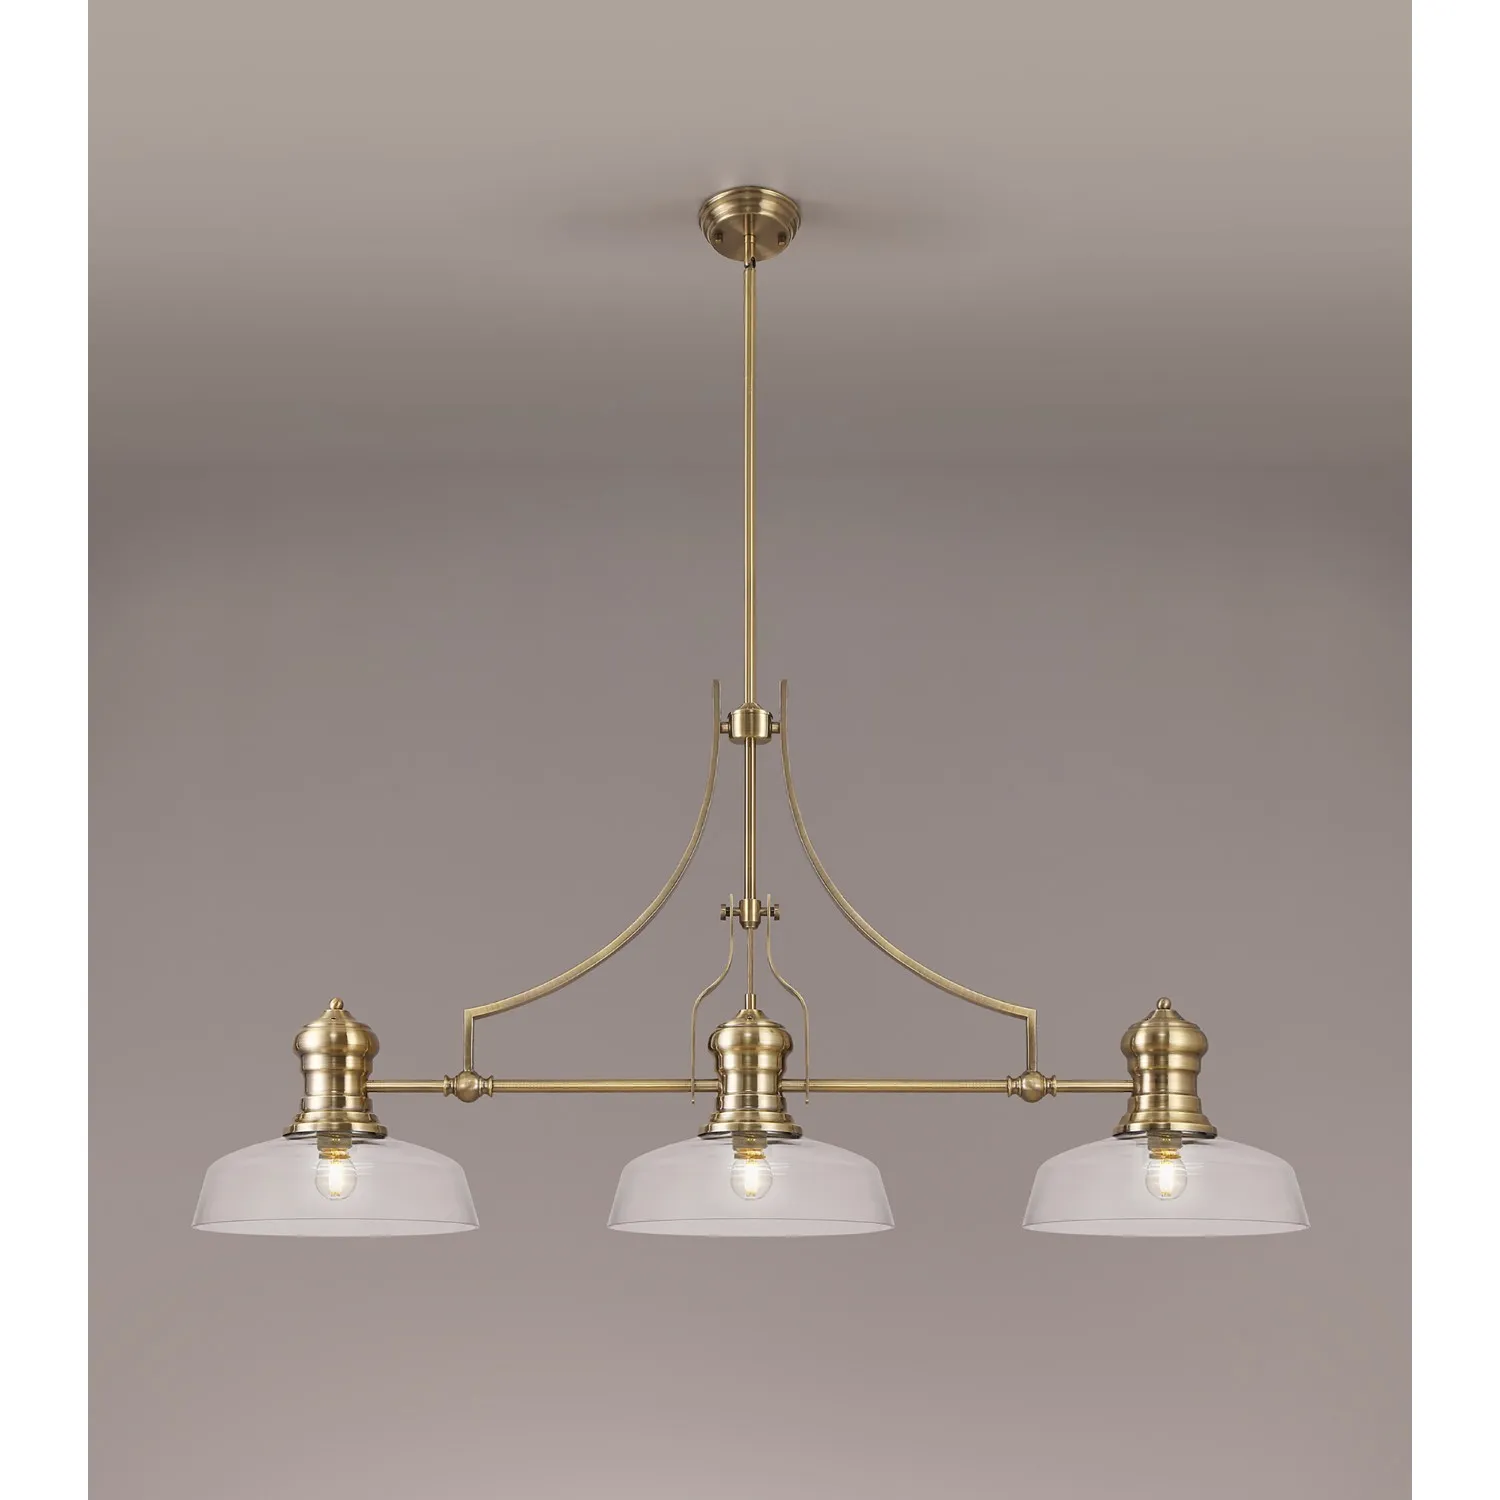 Sandy 3 Light Linear Pendant E27 With 30cm Flat Round Glass Shade, Antique Brass, Clear